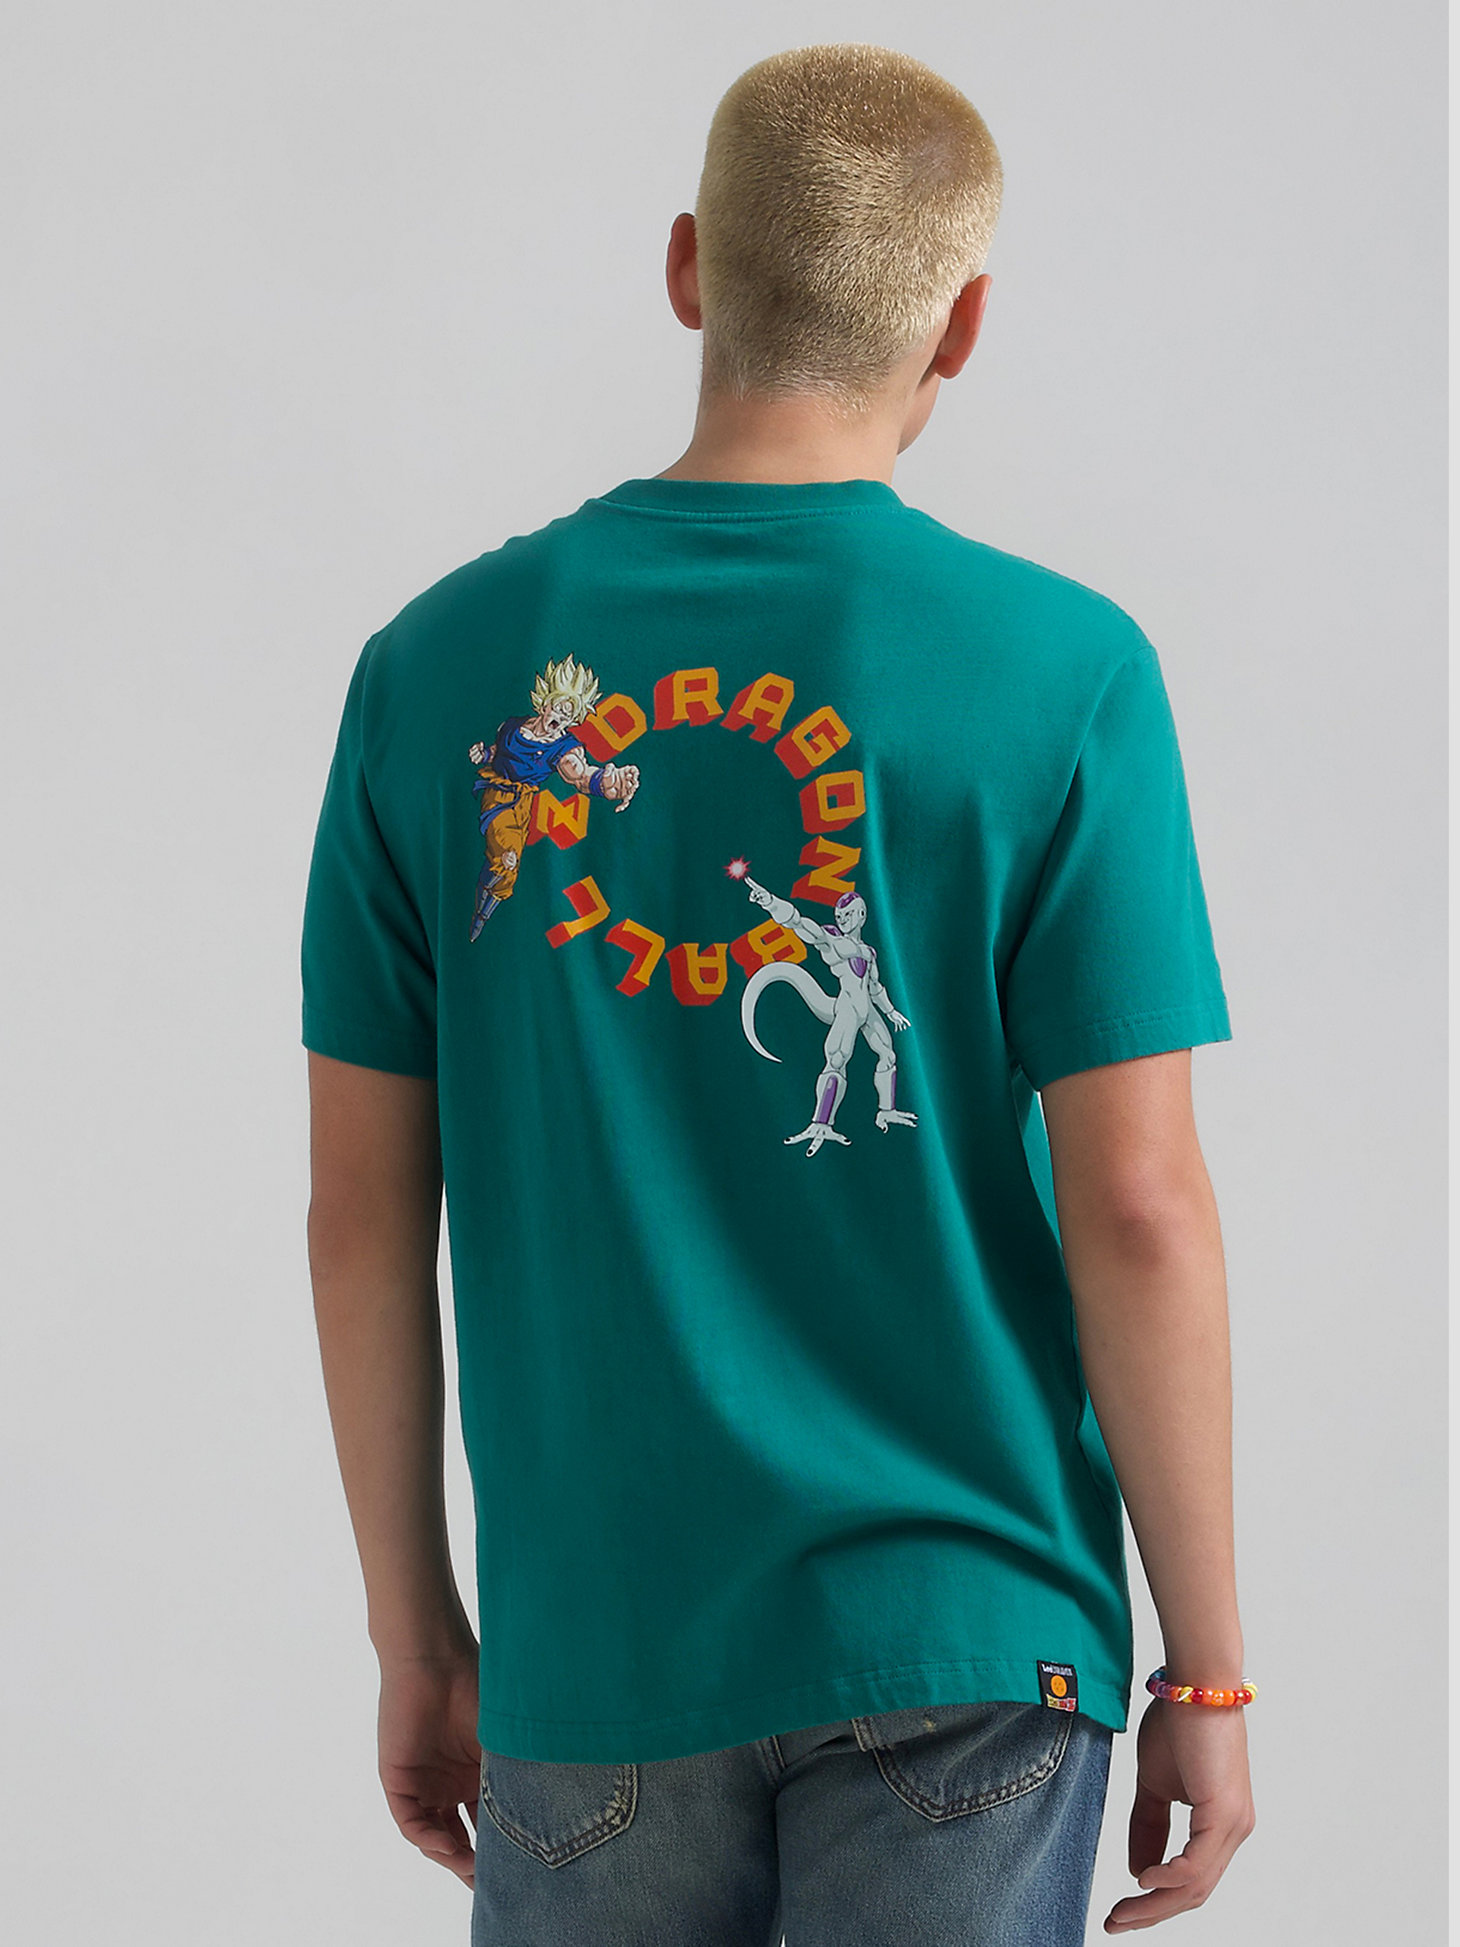 Men's Lee and Dragon Ball Z Face Off Tee in Teal Green alternative view 1